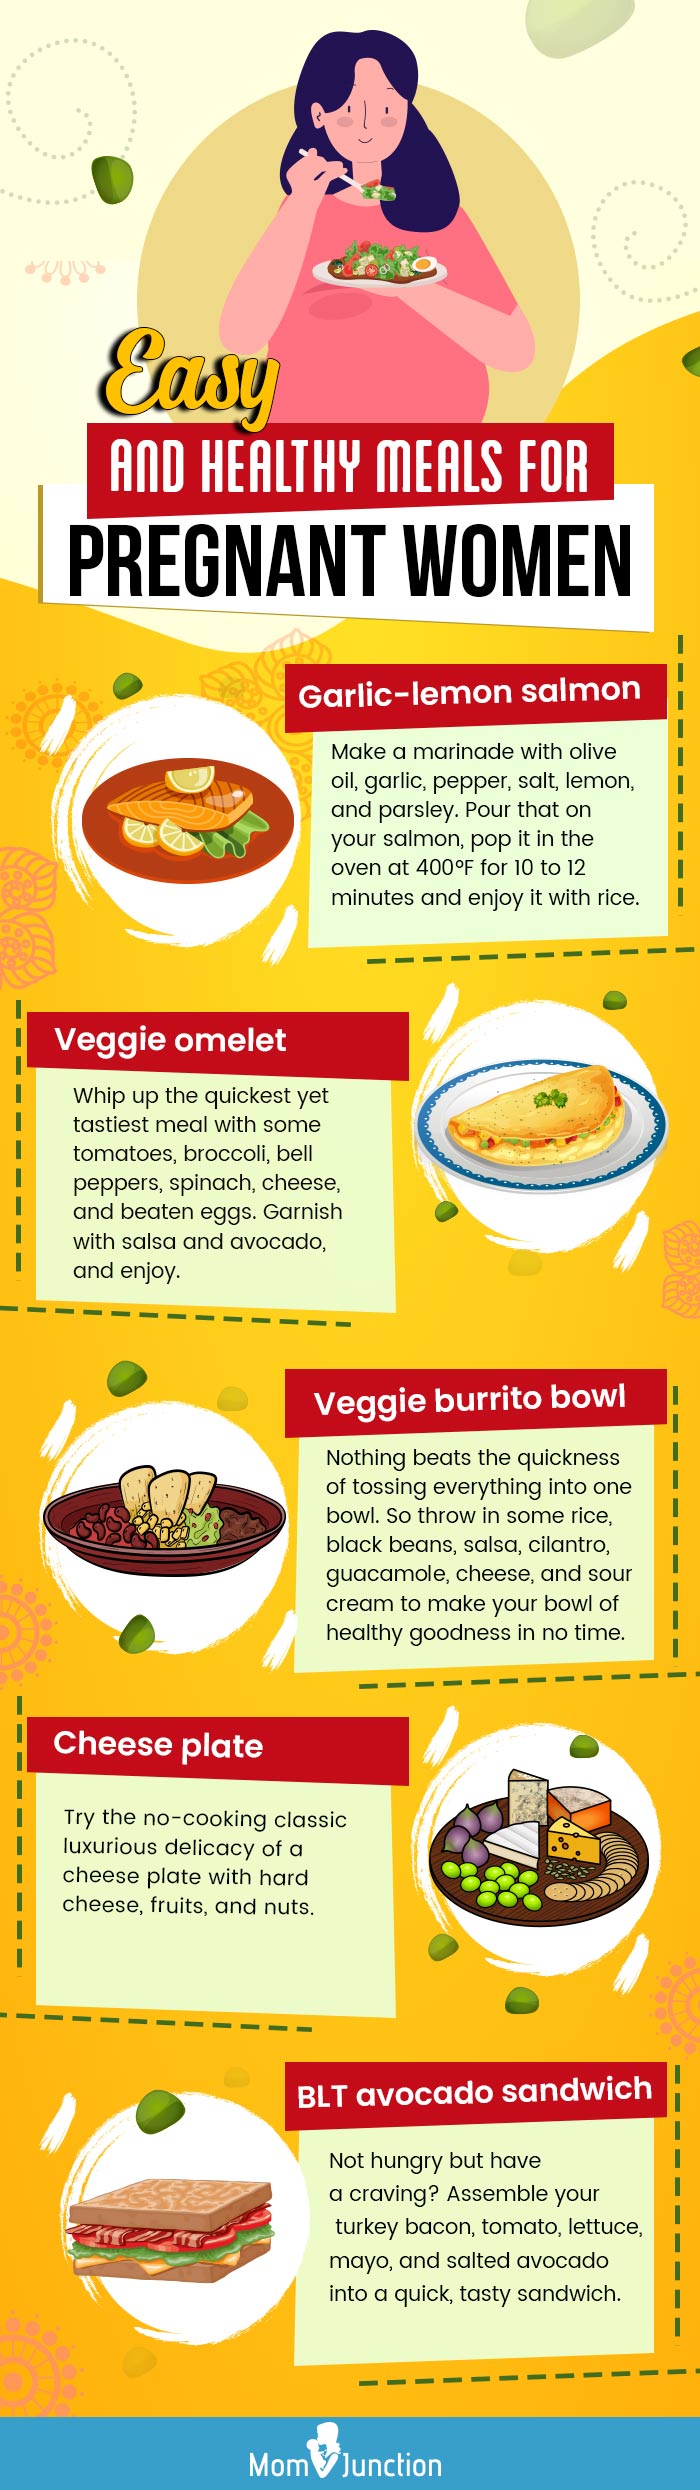 easy and healthy meals for pregnant women [infographic]